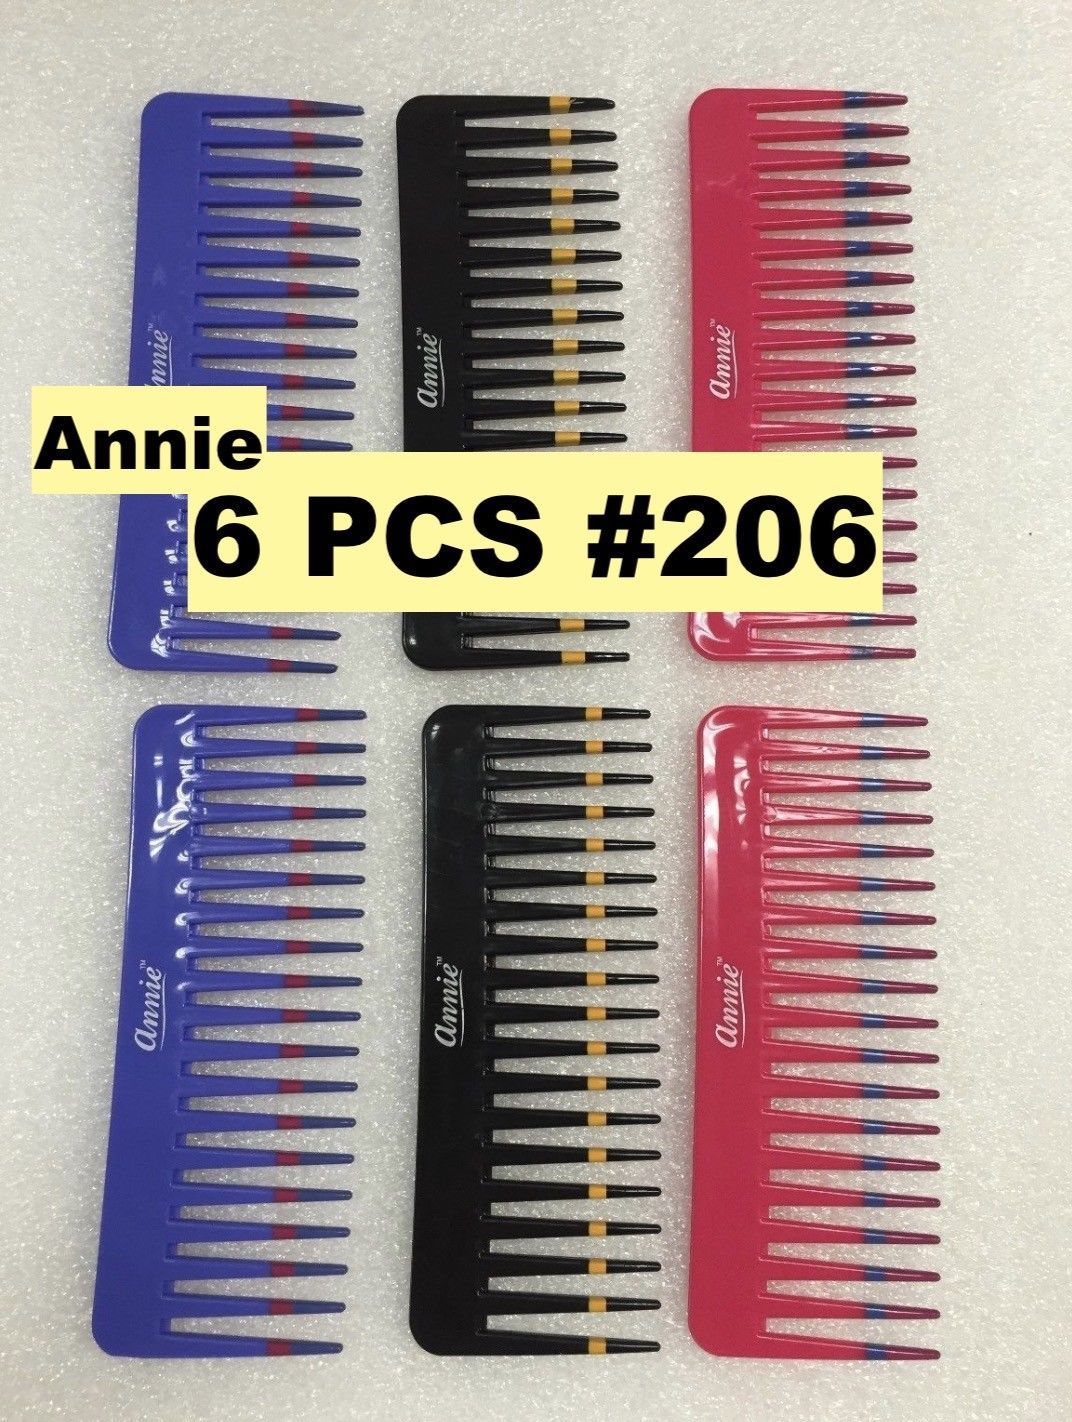 (6pcs) ANNIE VOLUME COMB #206 6" LONG 2.5" WIDE  TOOTH PLASTIC COMB FOR VOLUME - $4.99